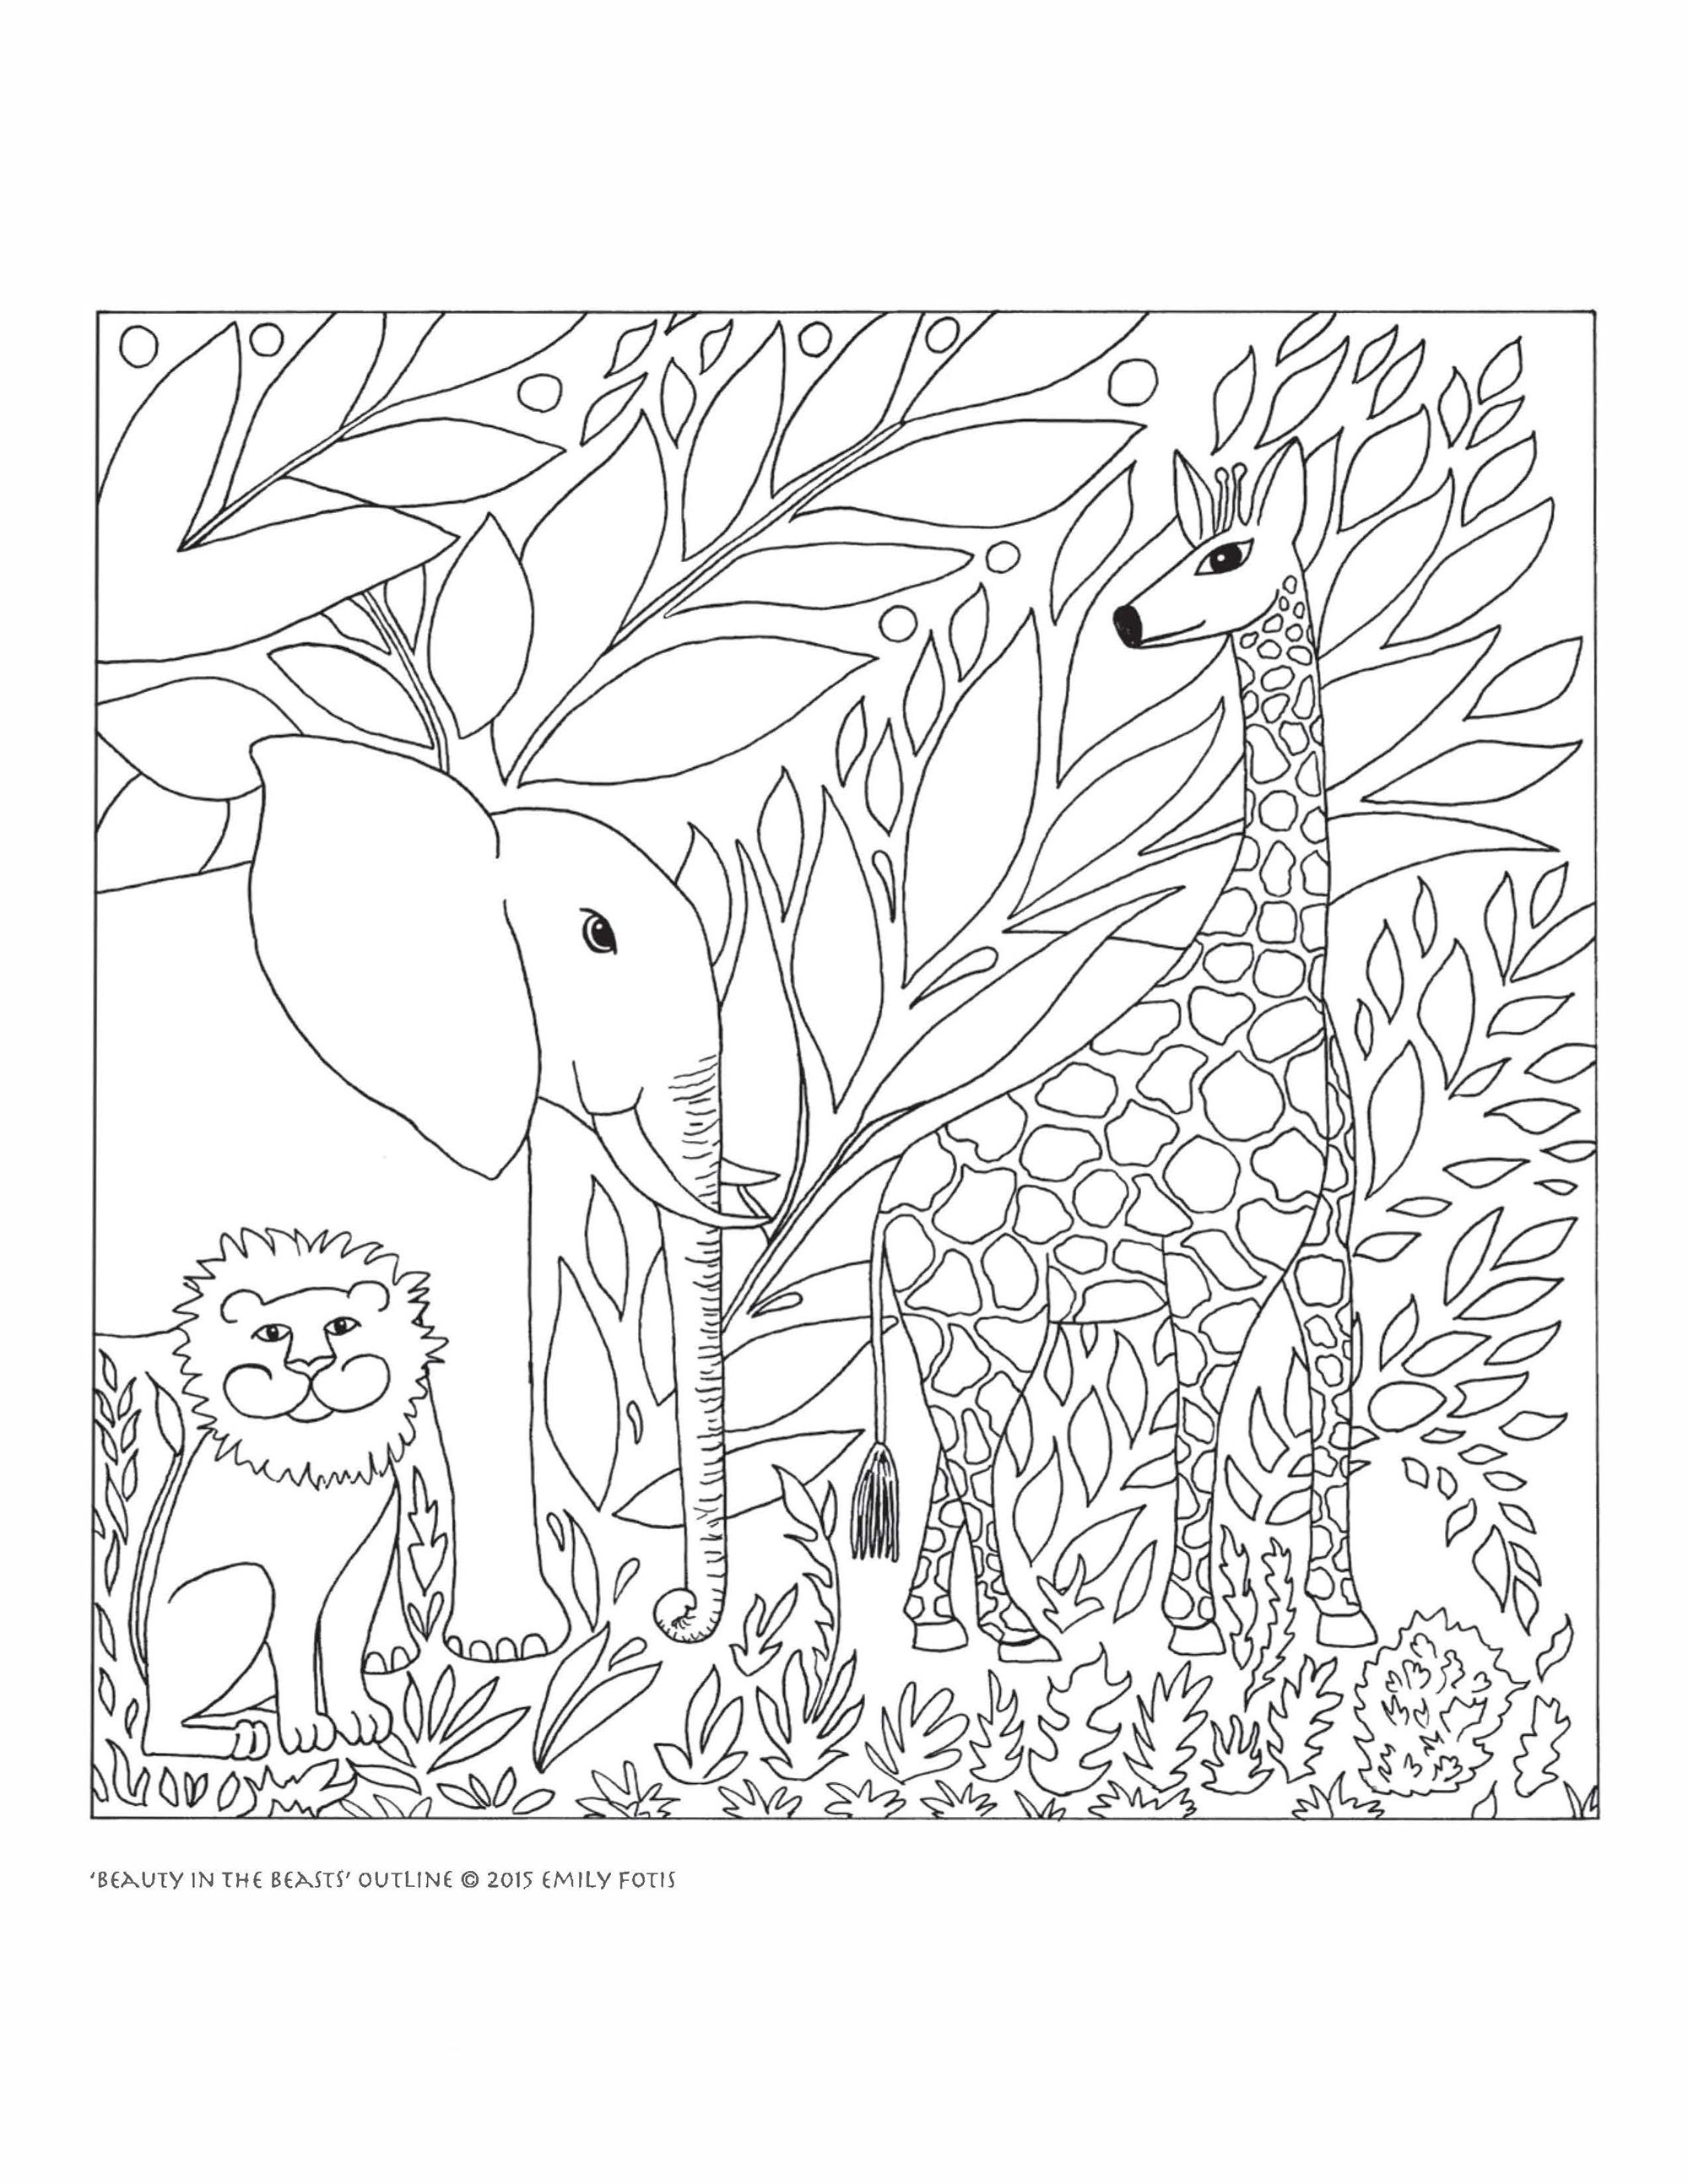 Coloring Book for Adults Relaxation: An Adult Coloring Book with Charming  Wild Jungle Animals Including Dinosaur, Panthers, Monkeys, Rhinos, Giraffe  a (Paperback)